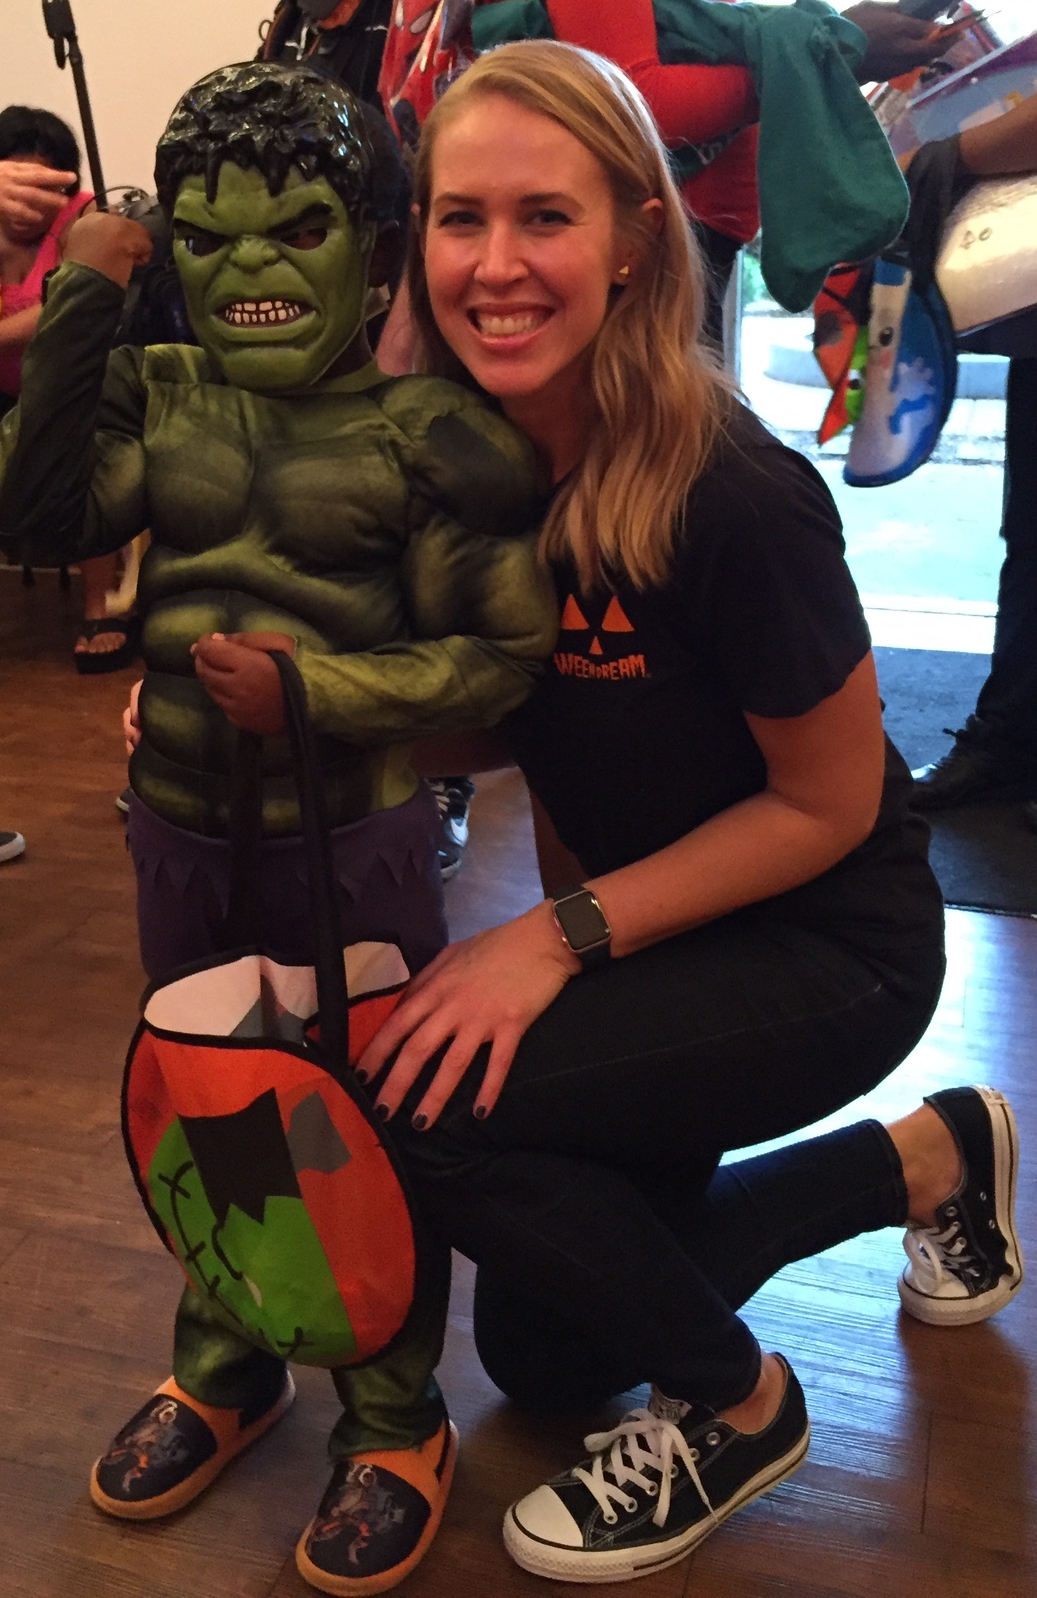  The Hulk and 'WEEN DREAM Founder Kelsey at Covenant House New Orleans on October 21, 2015 